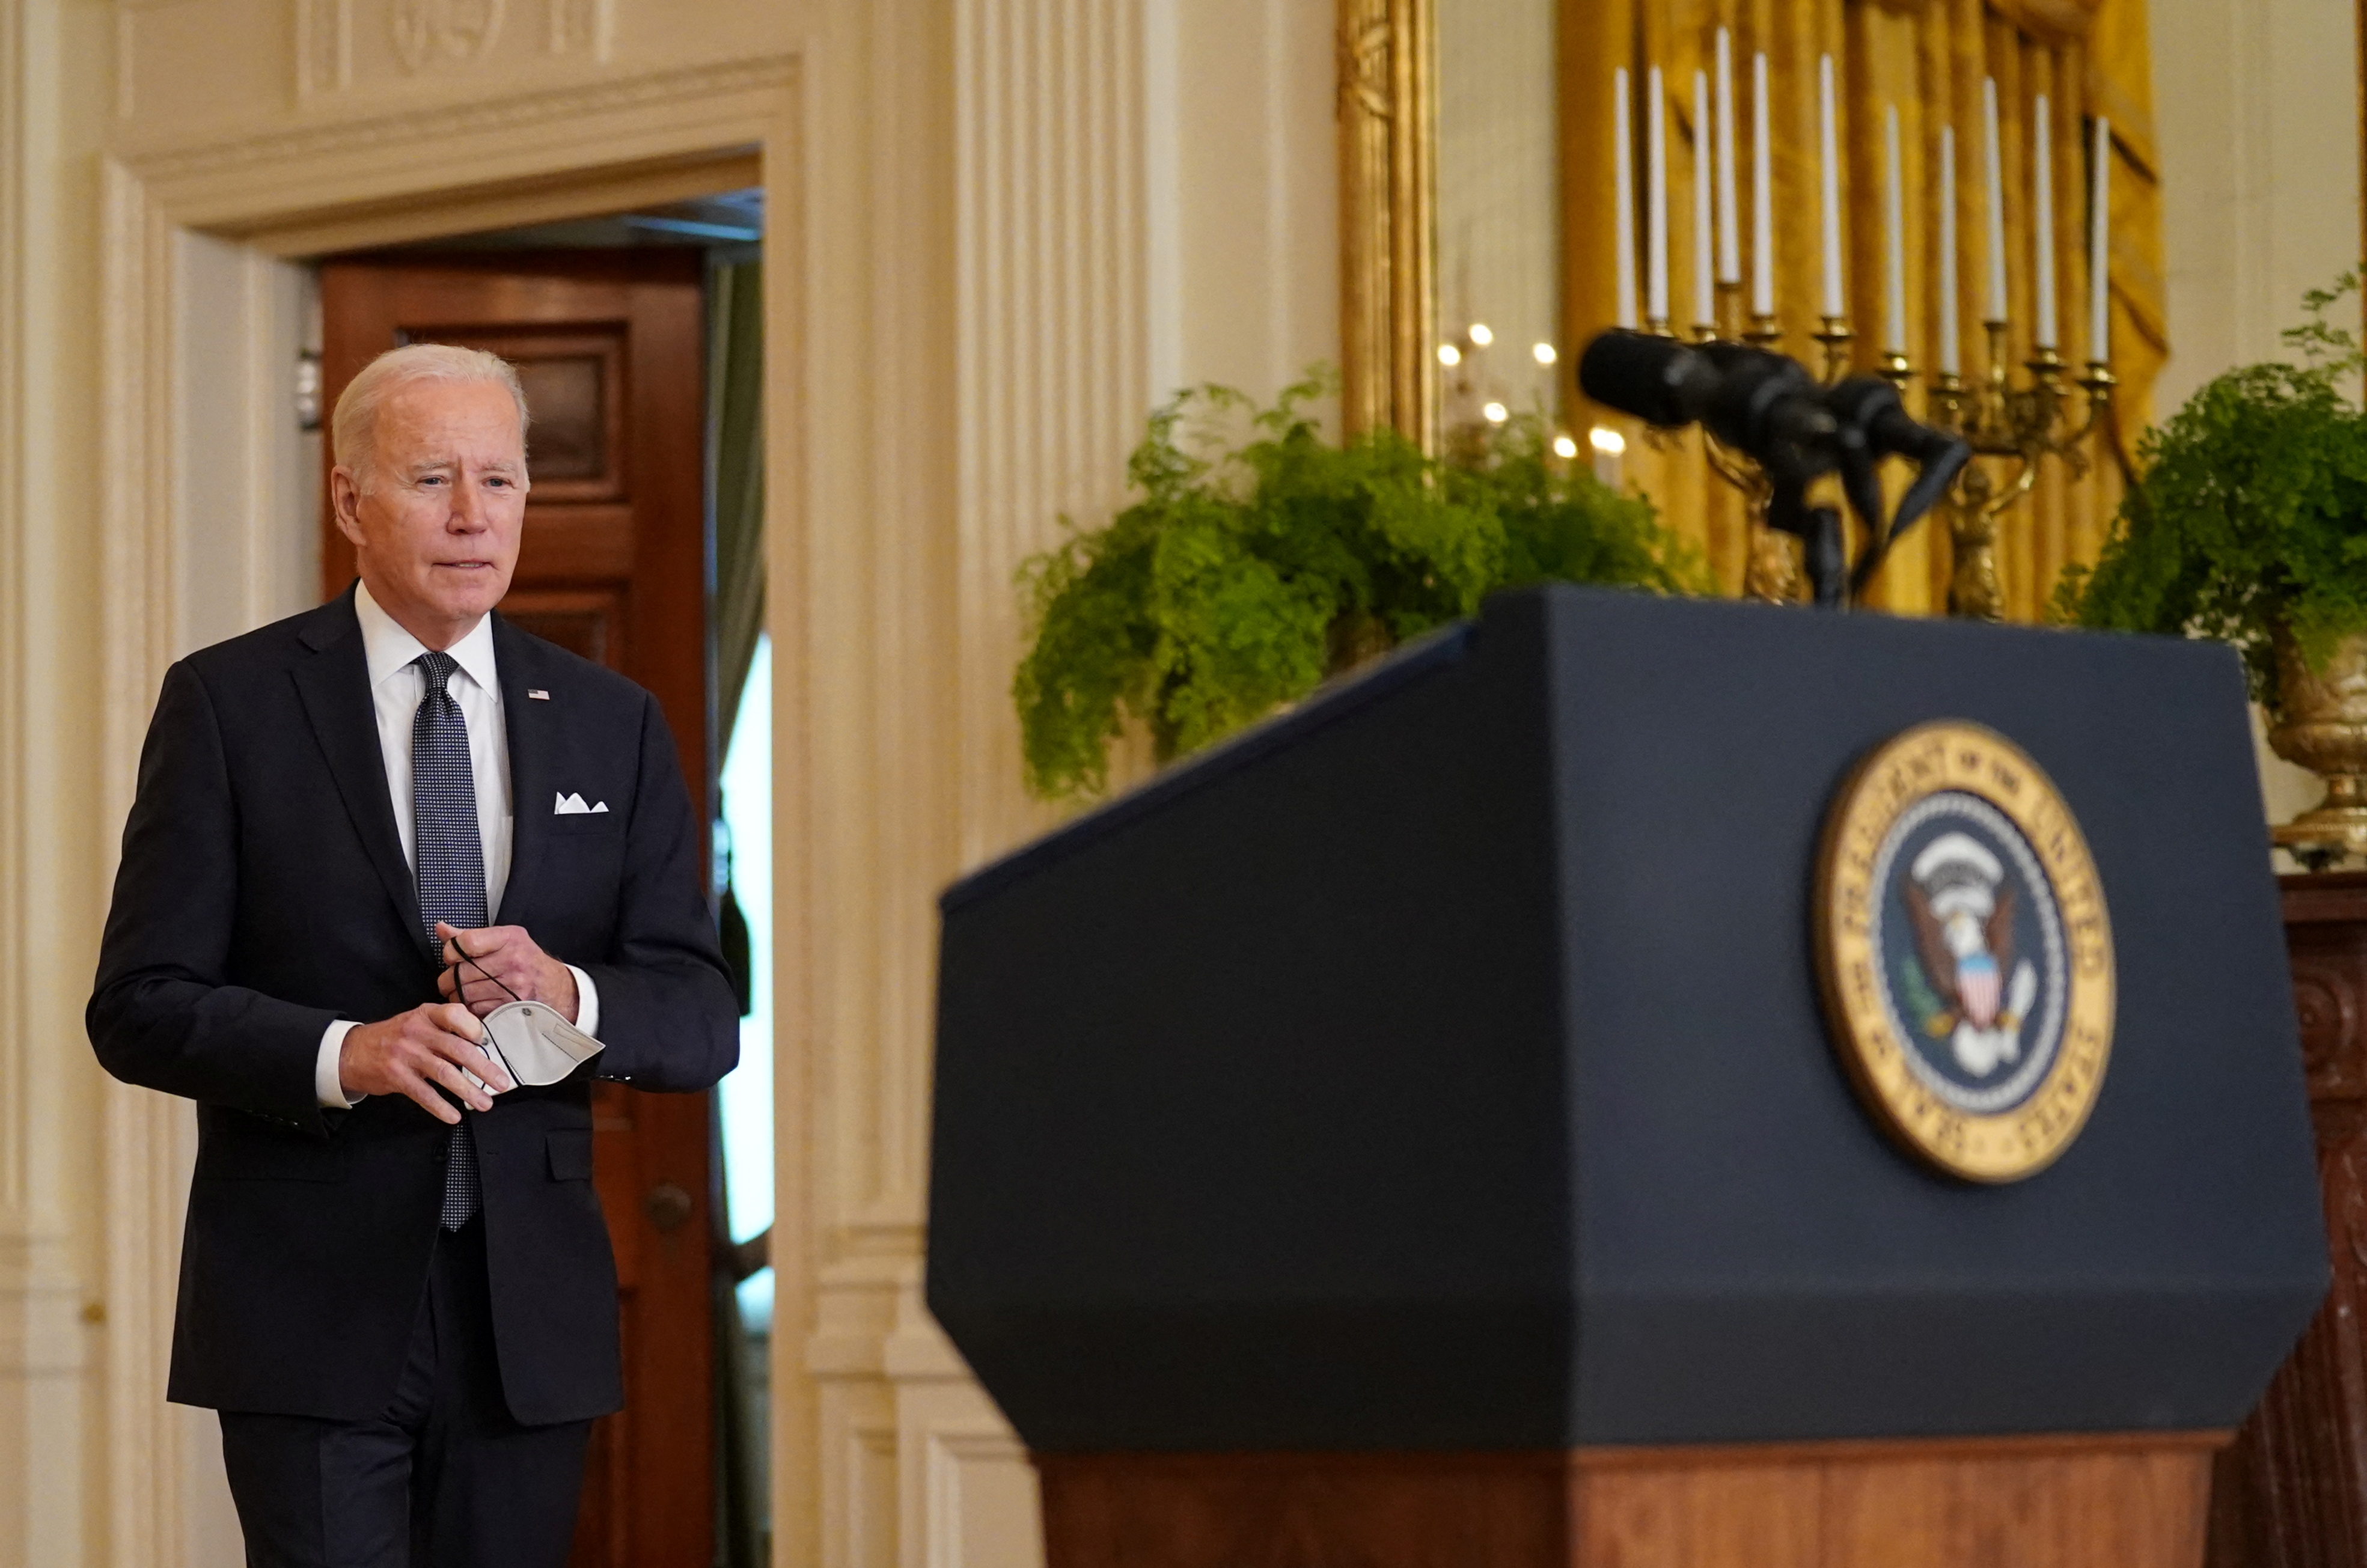 U.S. President Biden arrives to speak about situation in Russia and Ukraine, in Washington